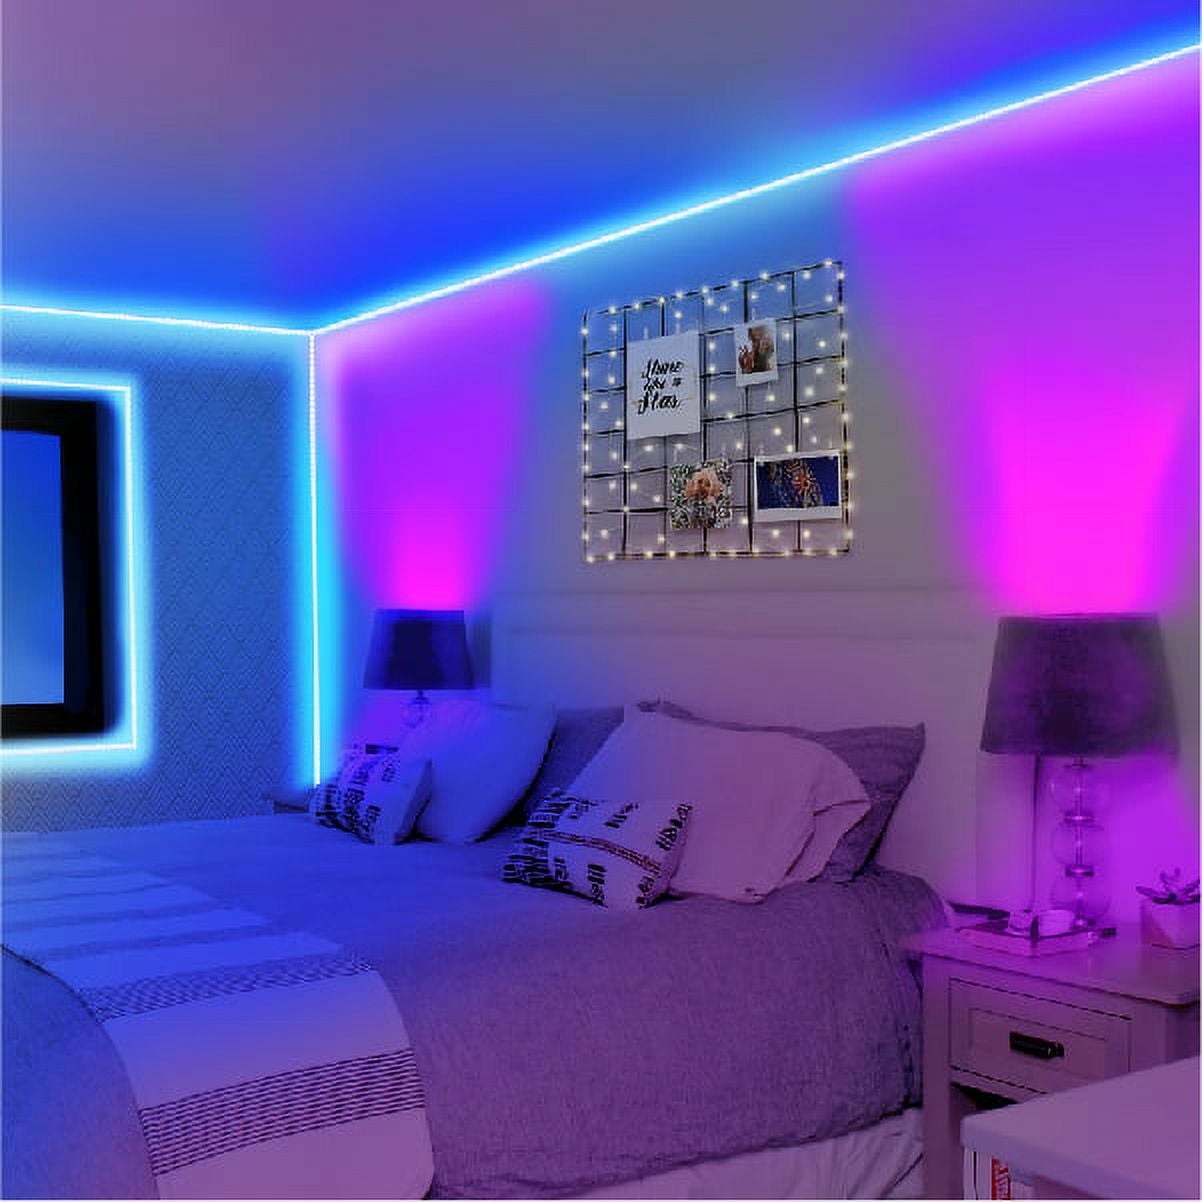 How to turn on led lights?